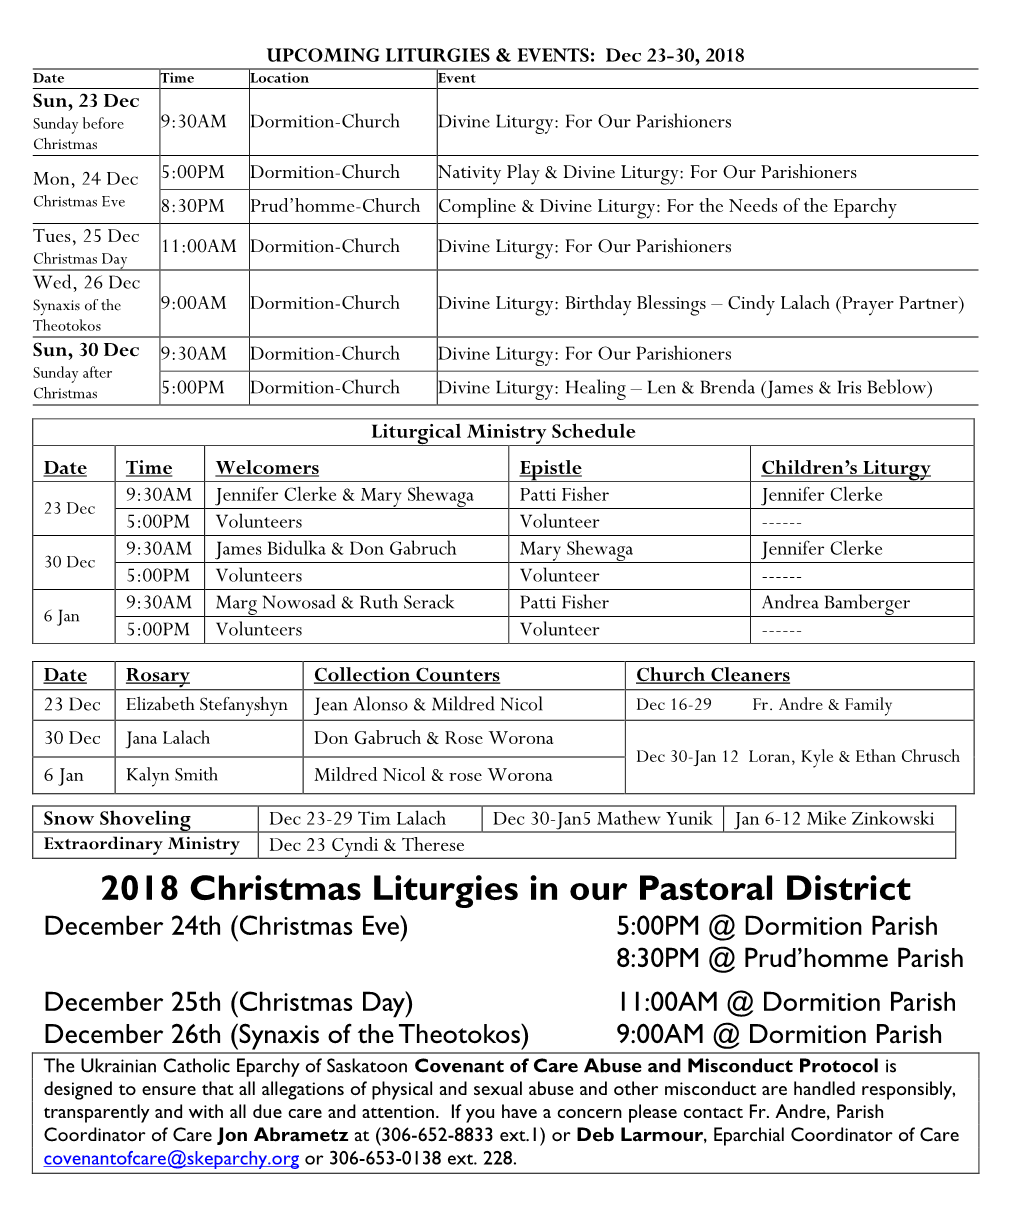 2018 Christmas Liturgies in Our Pastoral District